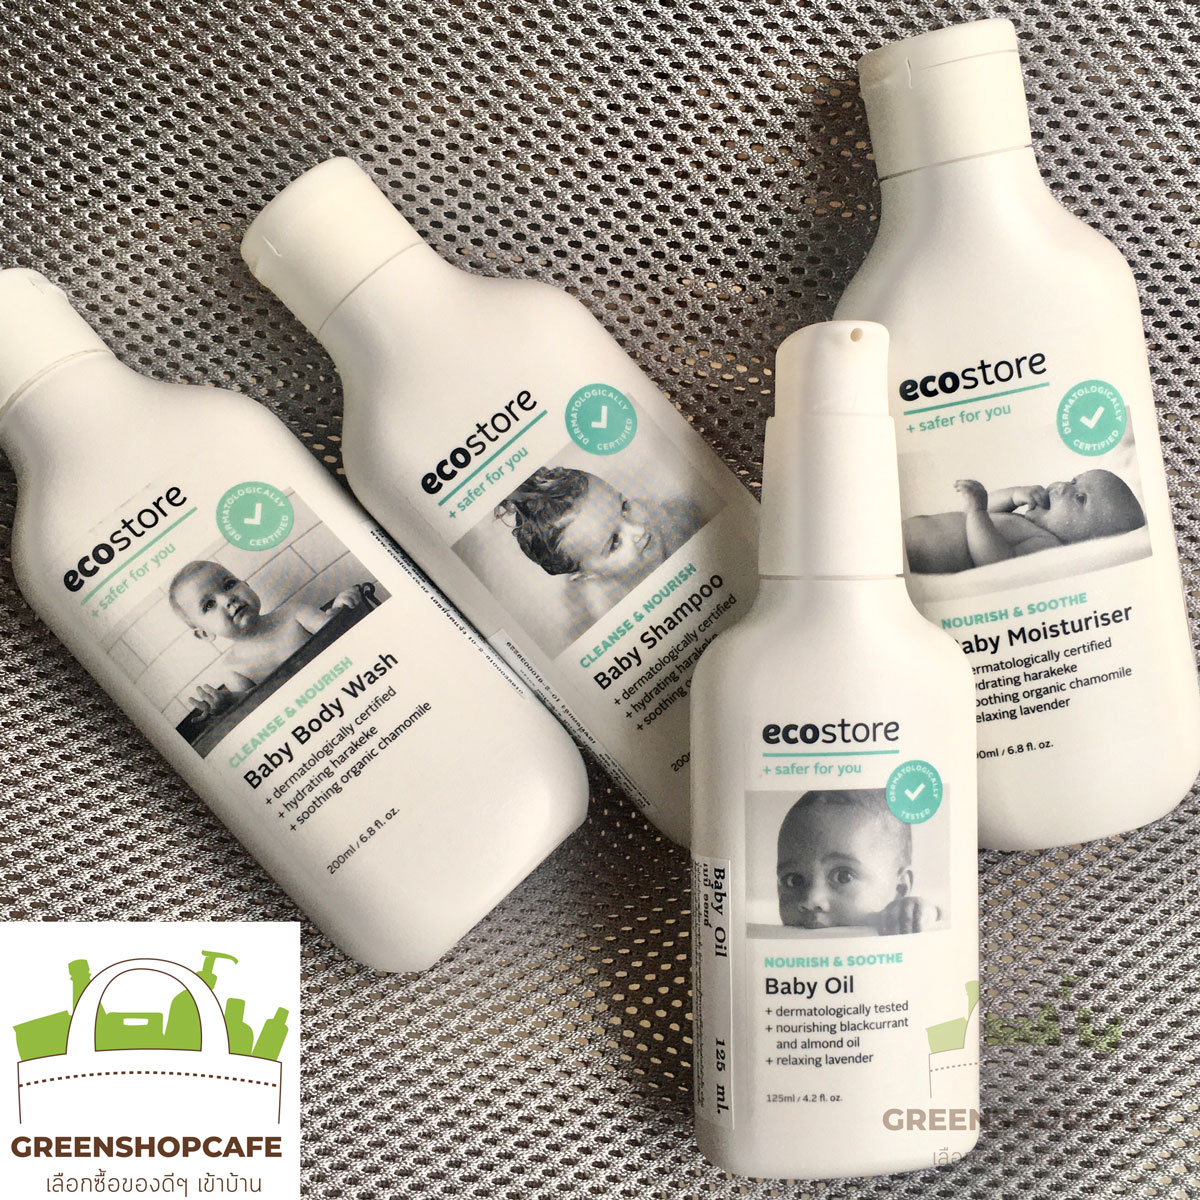 ecostore Personal care, home care and baby care